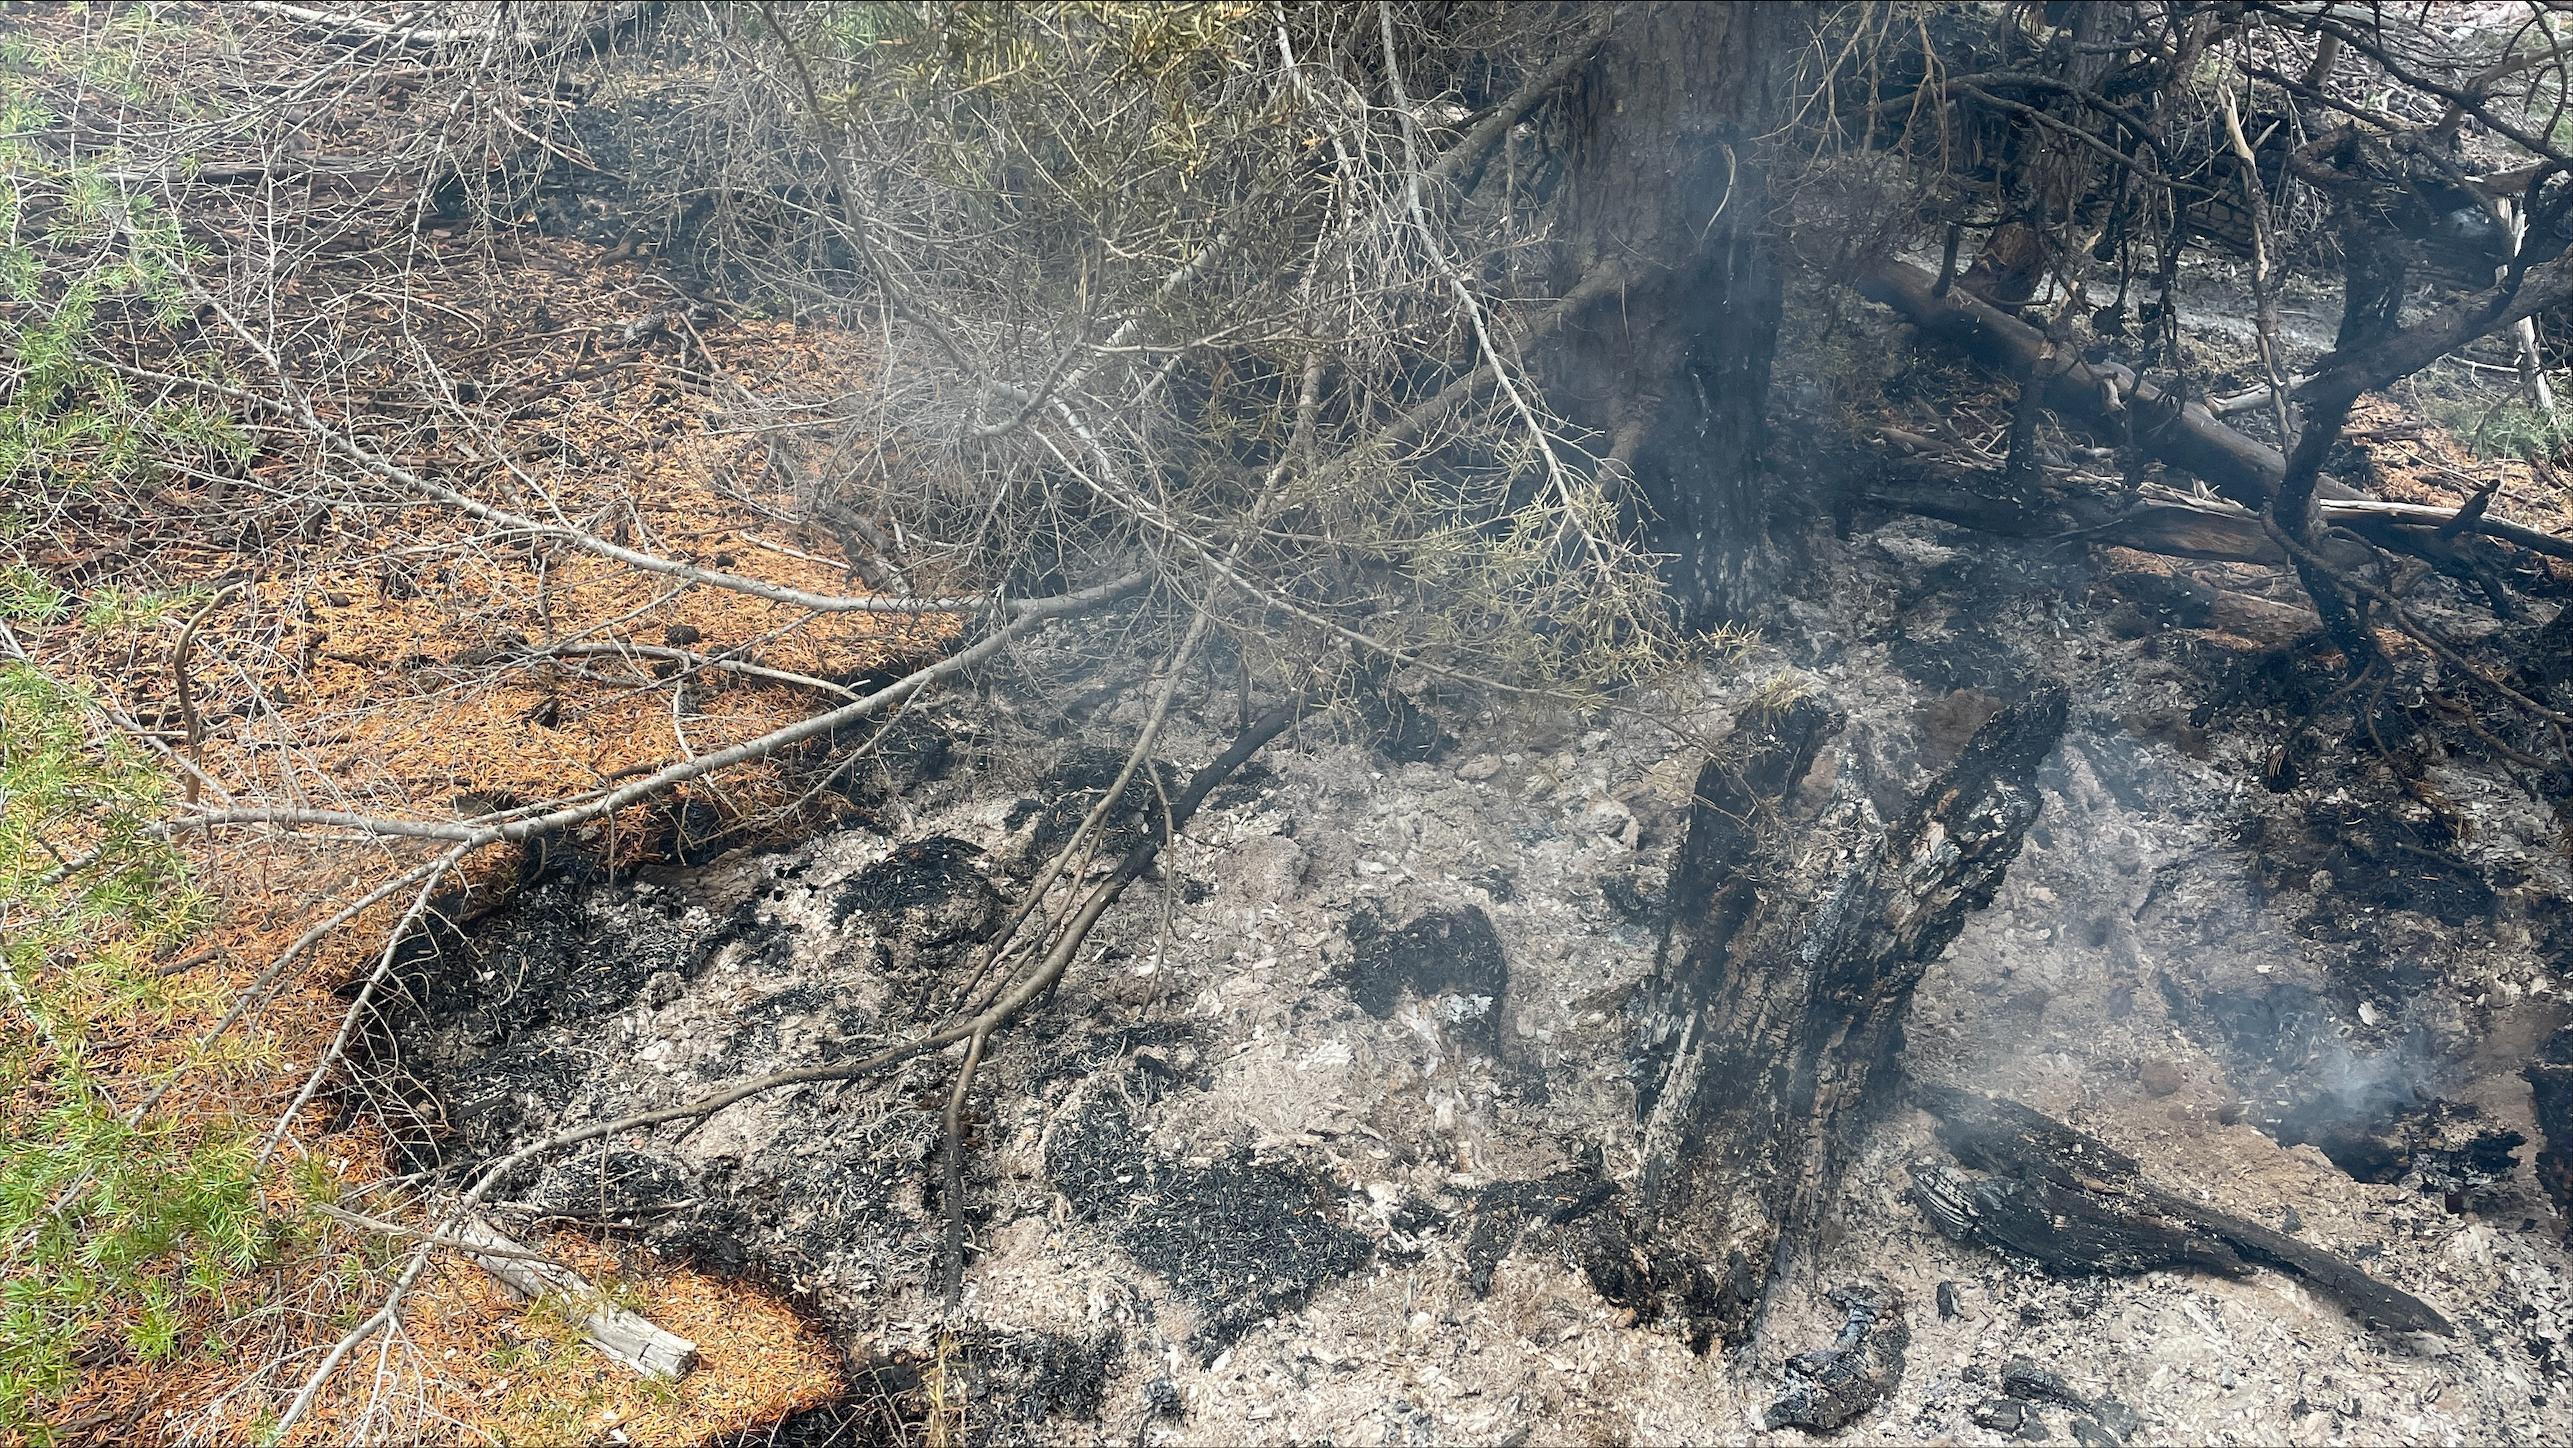 A stump smolders near the fire edge, where unburned vegetation is visible..  Smoke whiffs and ash is visible surrounding the stump.